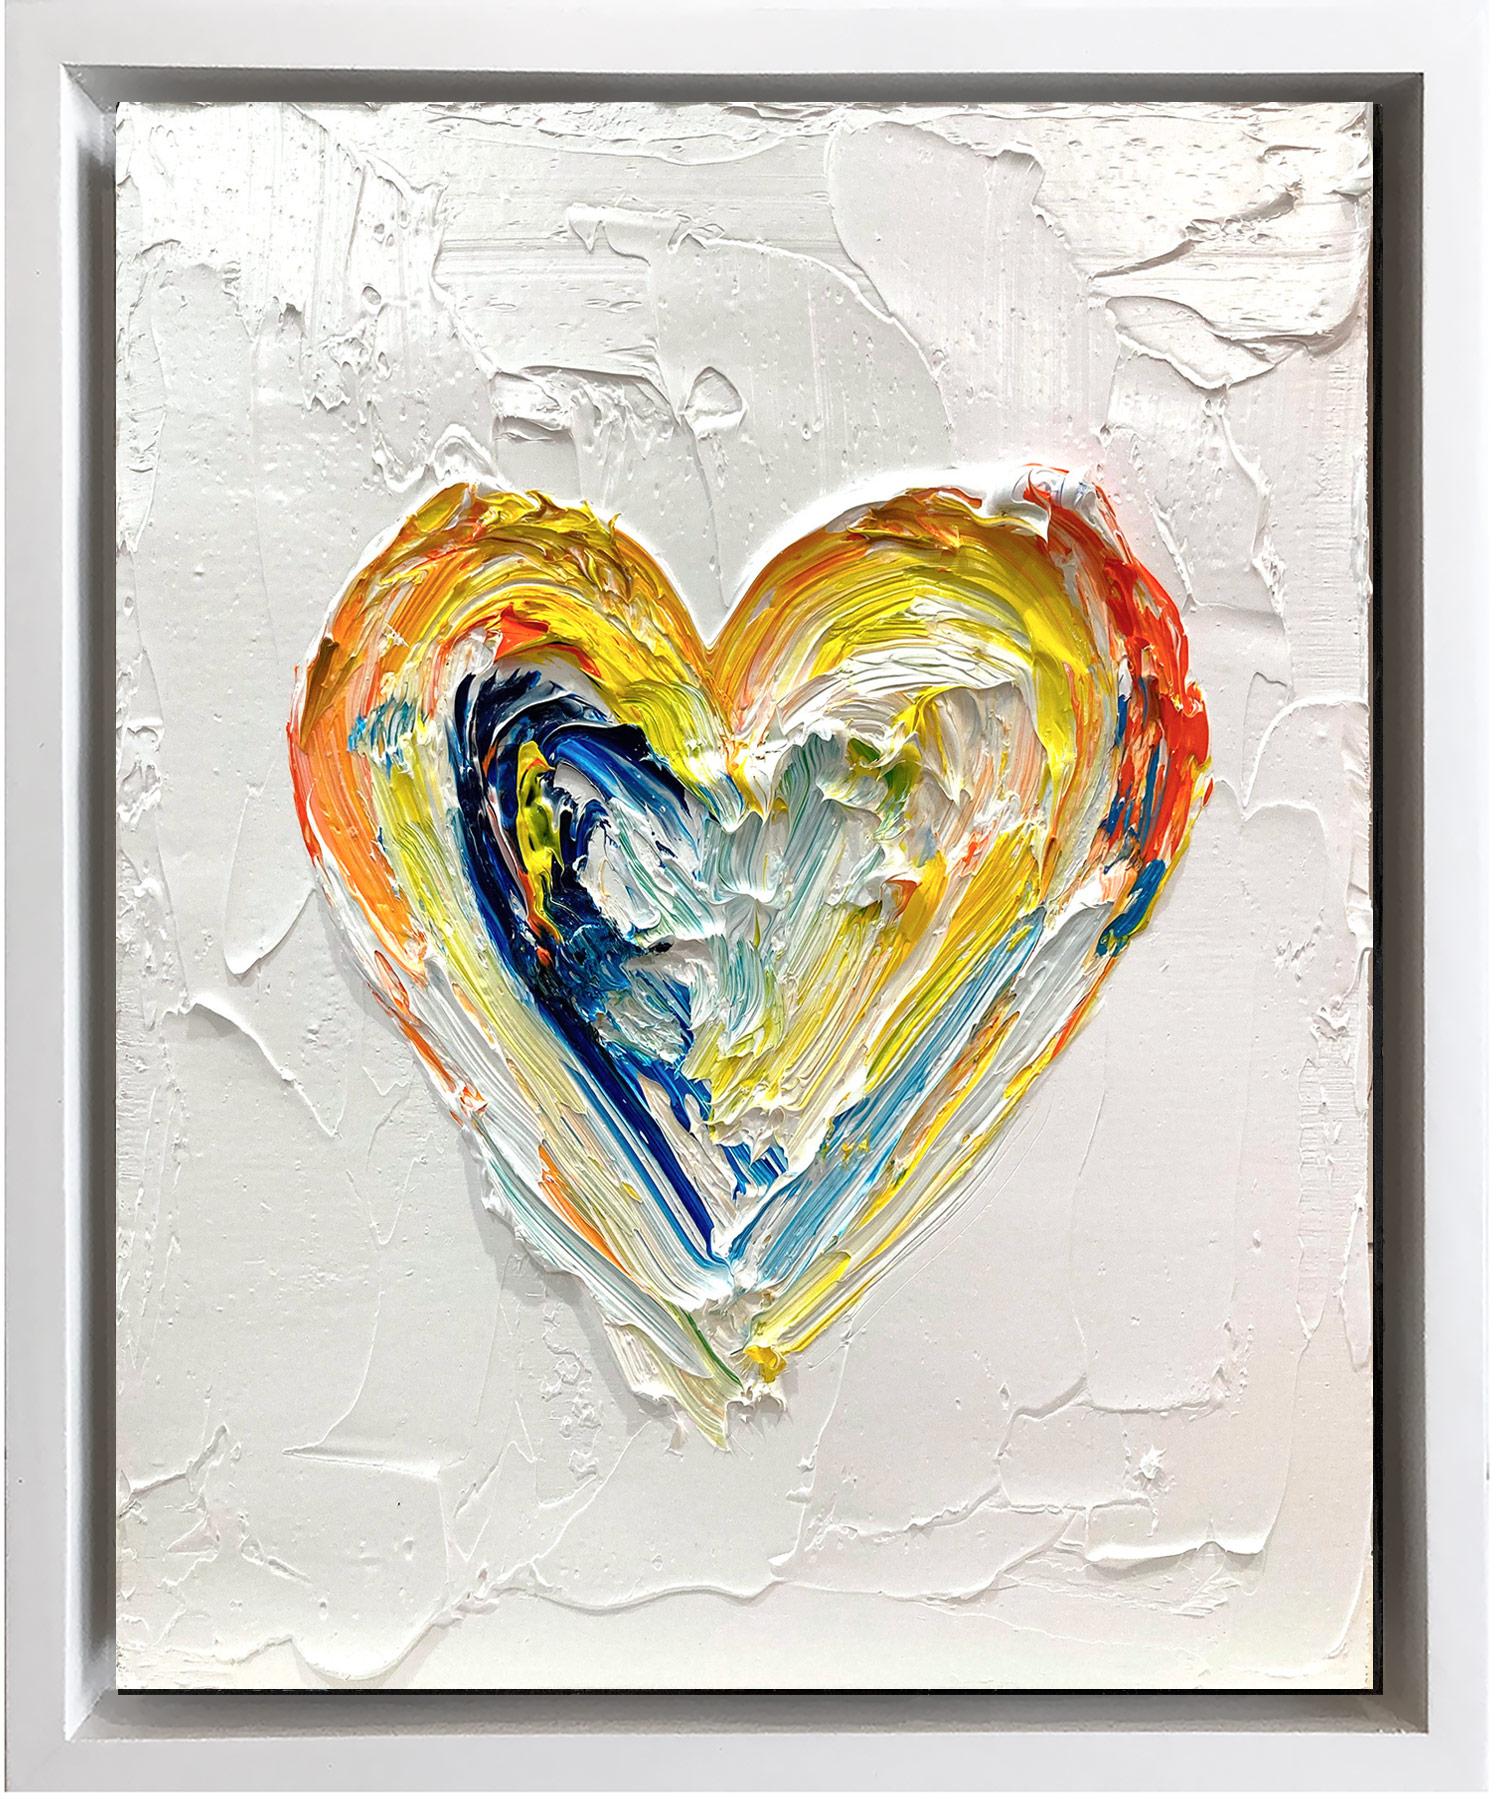 Cindy Shaoul Figurative Painting - "My Come Together Heart" Contemporary Pop Oil Painting on Wood on White Frame